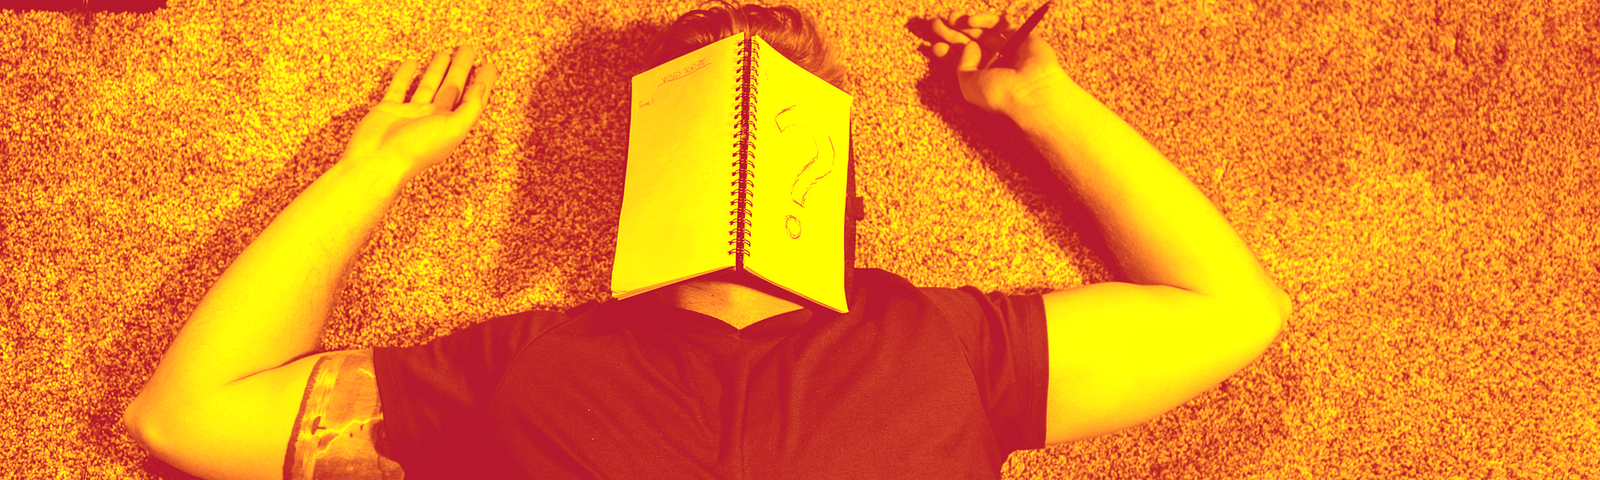 A man is laying on the floor with a notebook open over his face with a pen in his left hand. The notebook has a question mark drawn on a page using a blue pen.